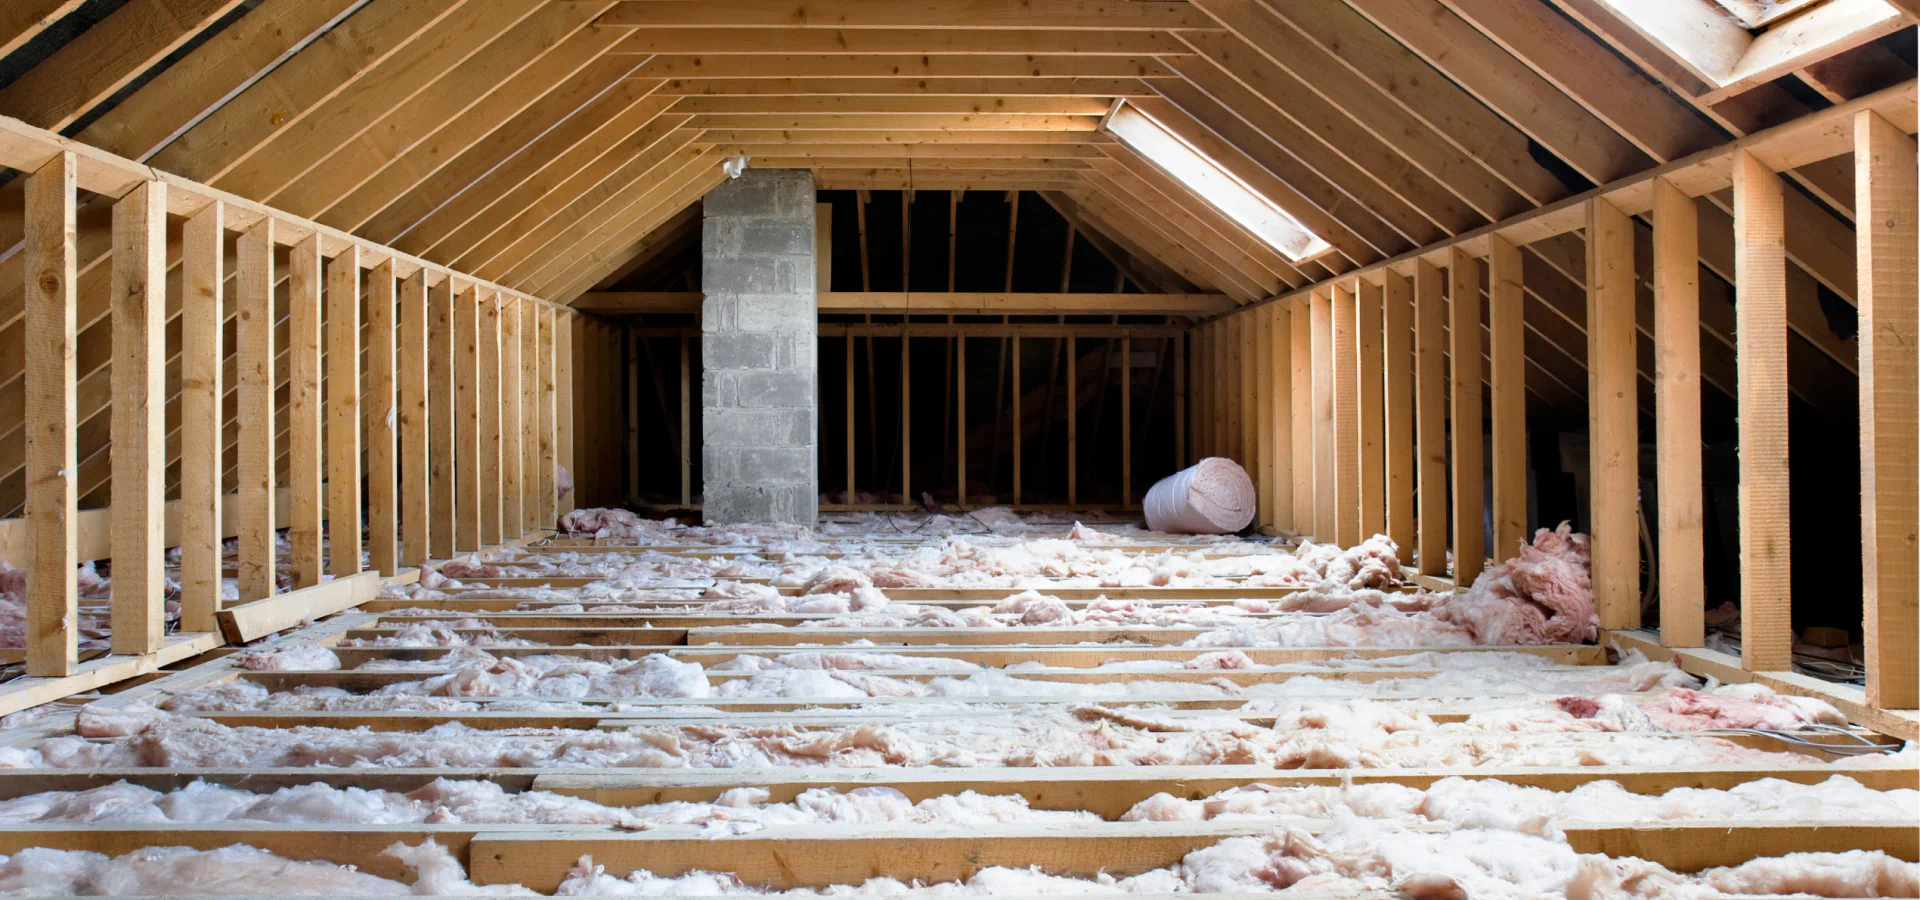 attic with insulated flooring and ceiling